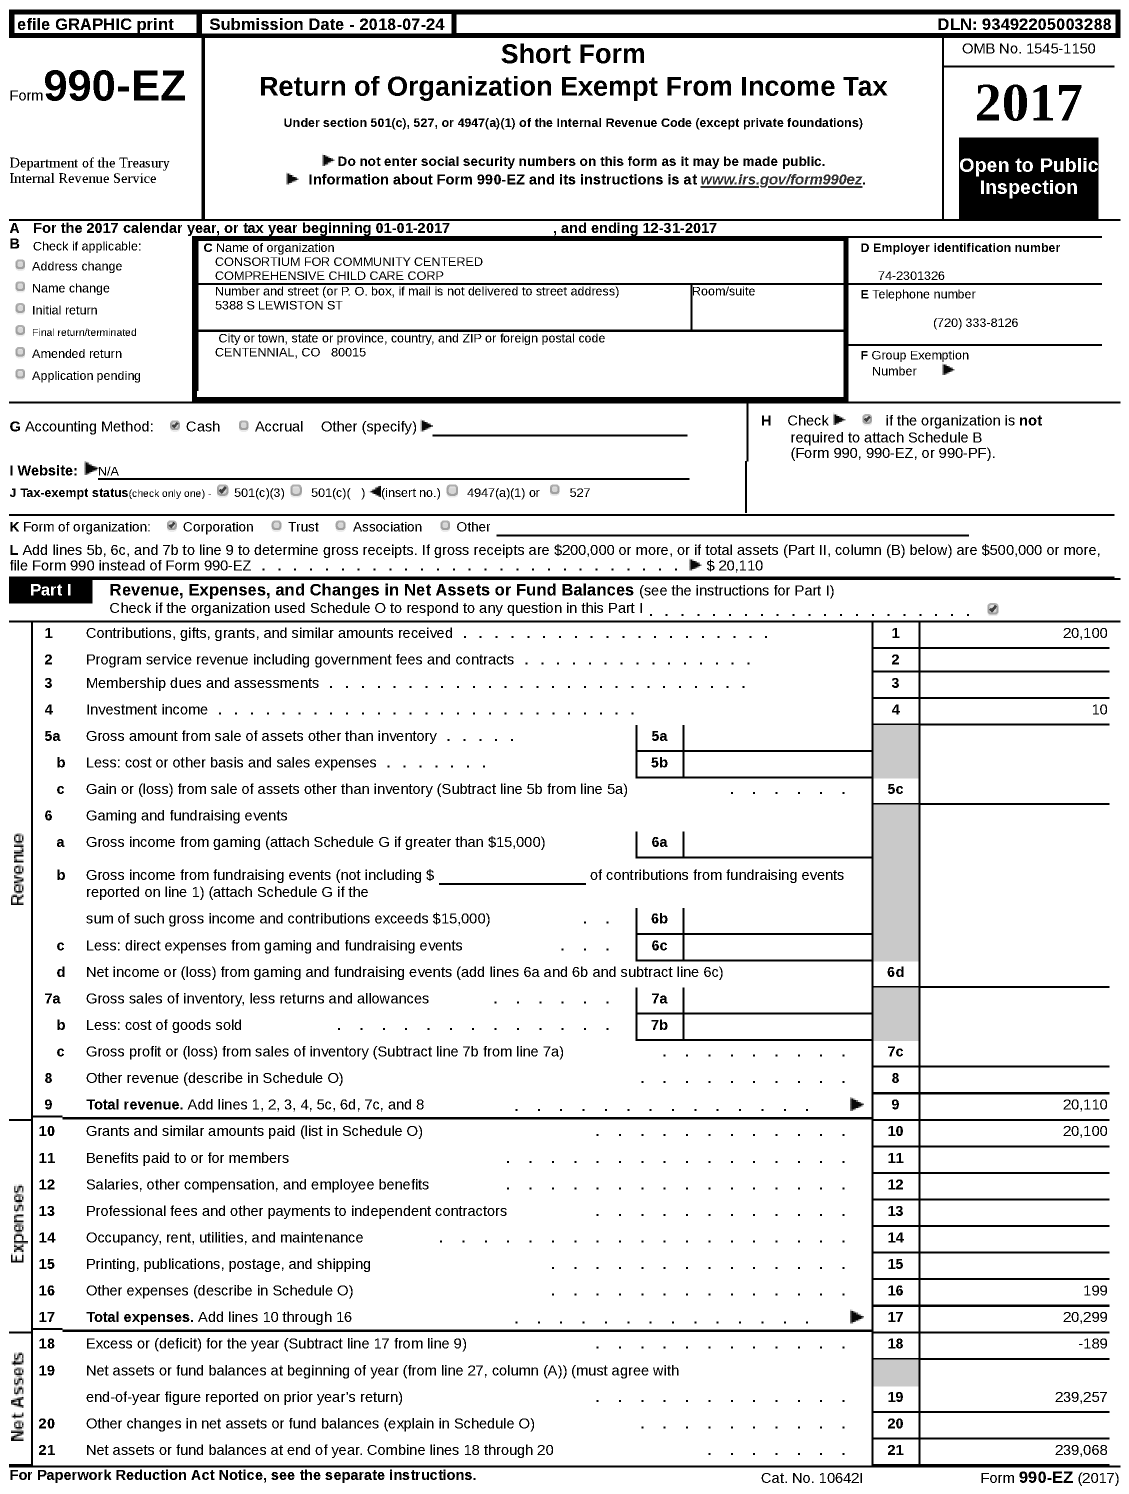 Image of first page of 2017 Form 990EZ for Consortium for Community Centered Comprehensive Child Care Corporation